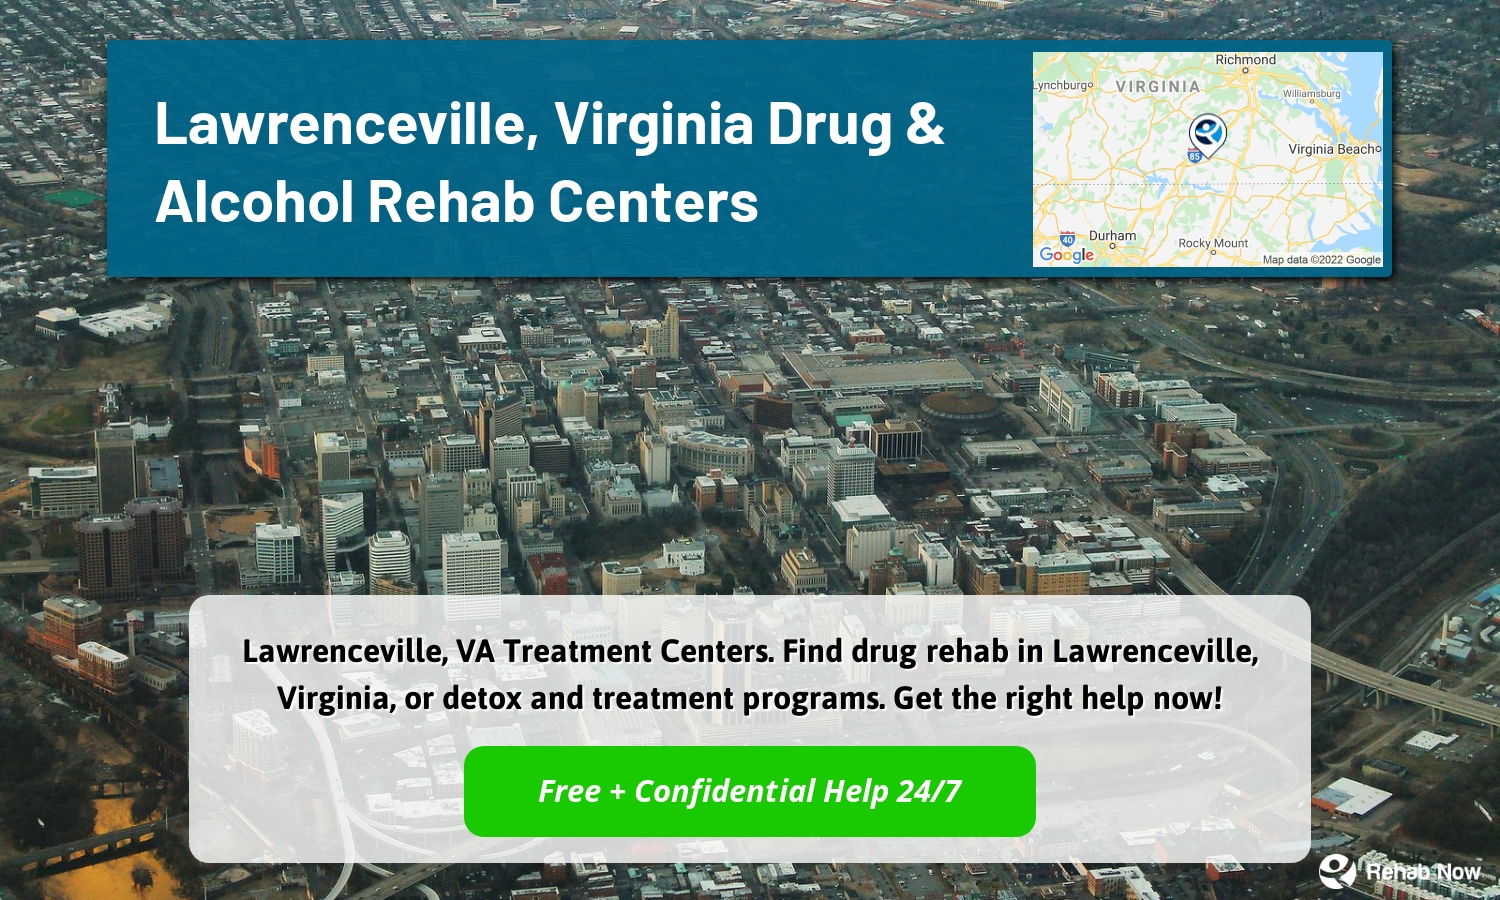 Lawrenceville, VA Treatment Centers. Find drug rehab in Lawrenceville, Virginia, or detox and treatment programs. Get the right help now!